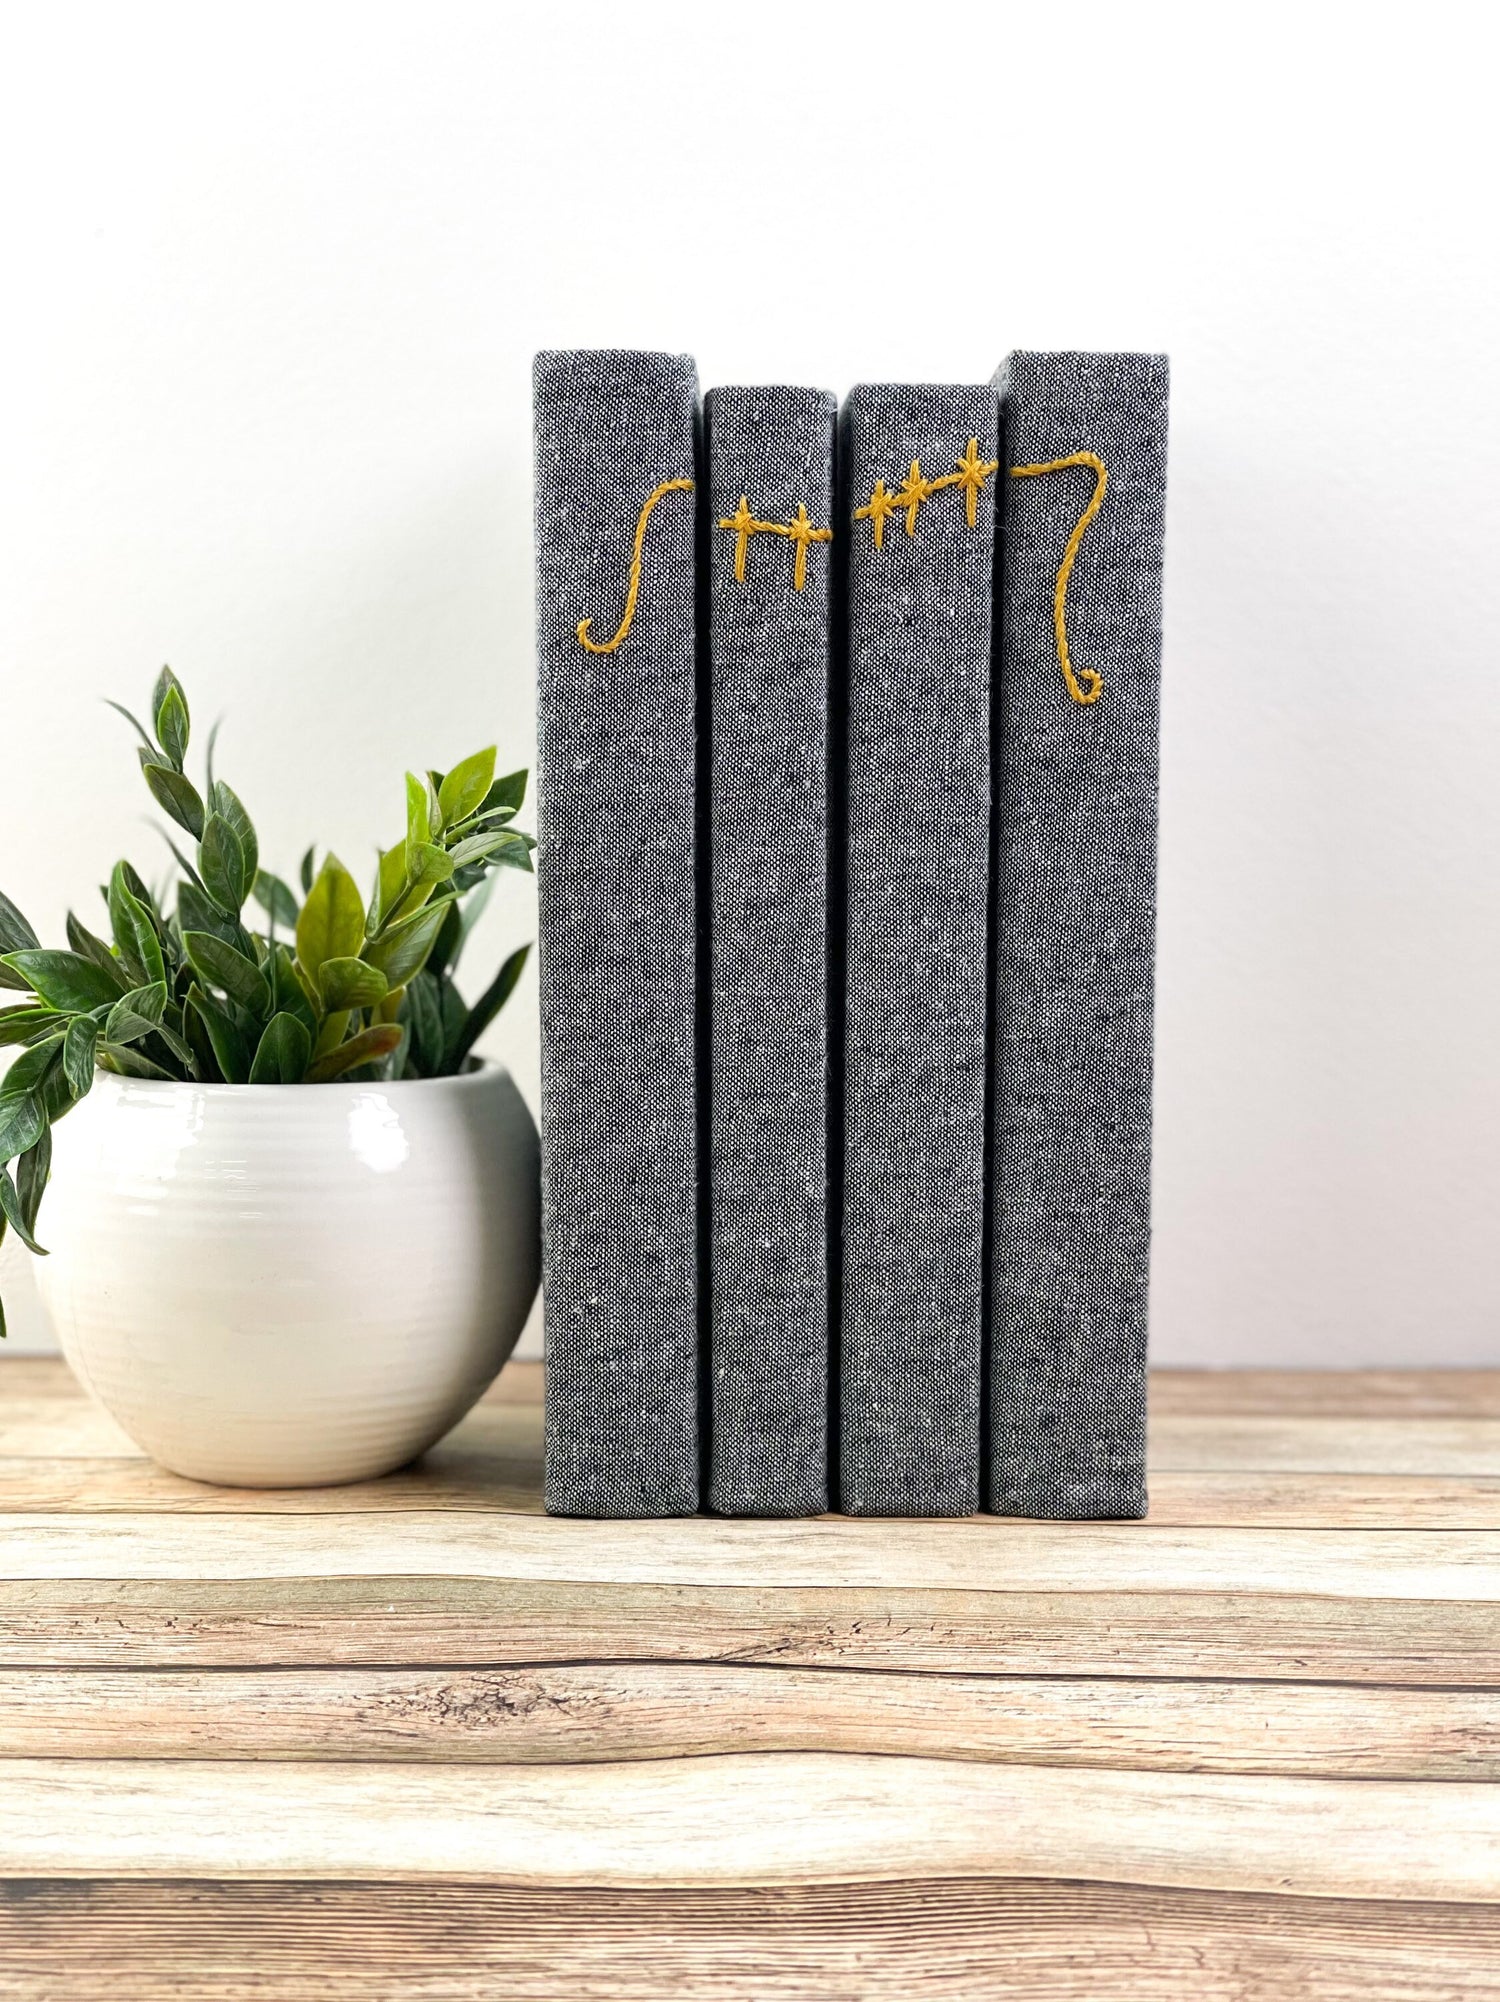 Embroidered Book Set